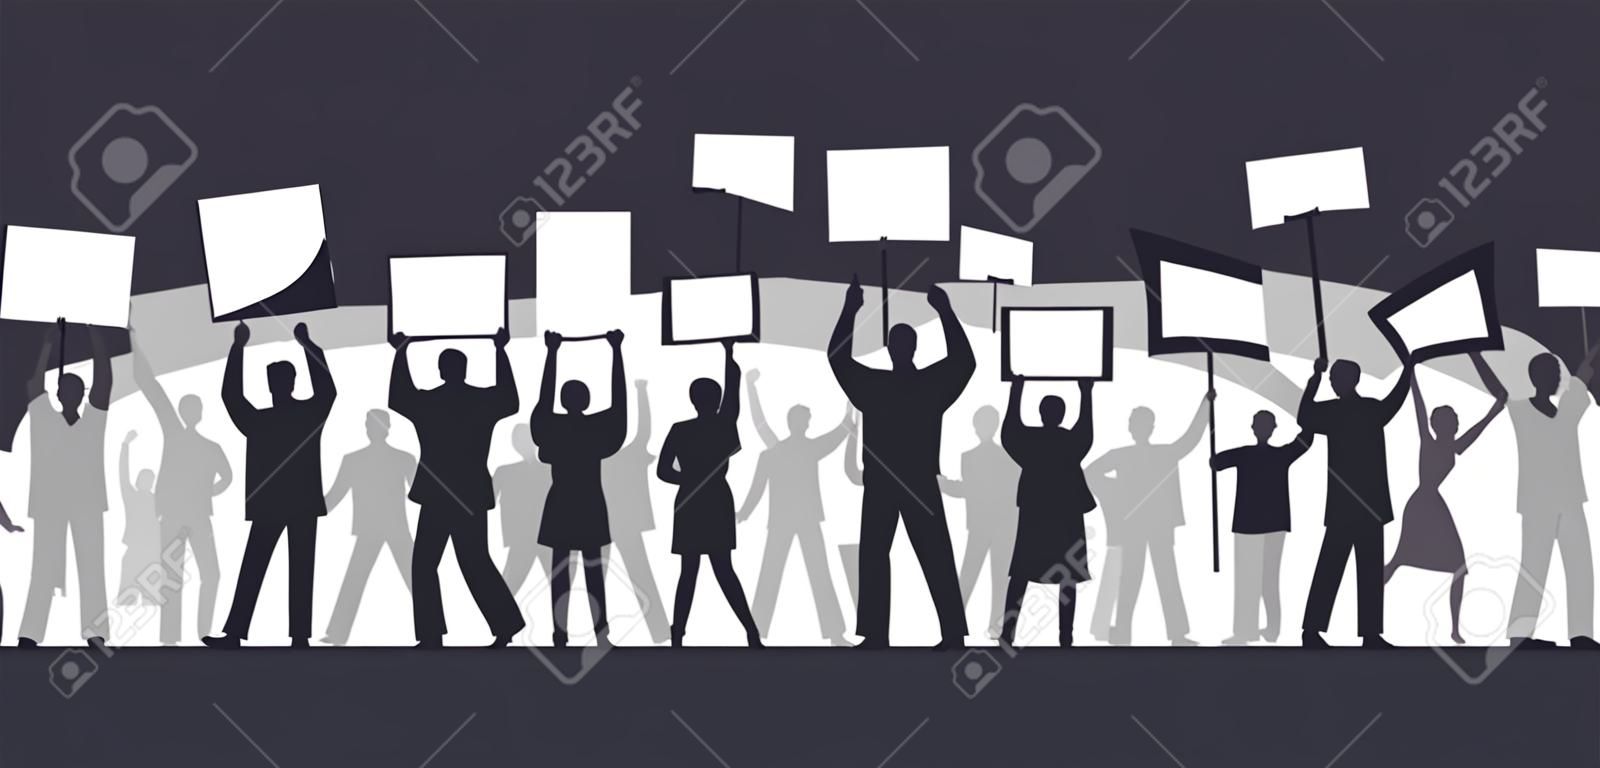 Protest. People holding placards. Persons standing together with blank banners. Group of men and women with banners taking part in parade, picket, protests. Social activism. Vector illustration.